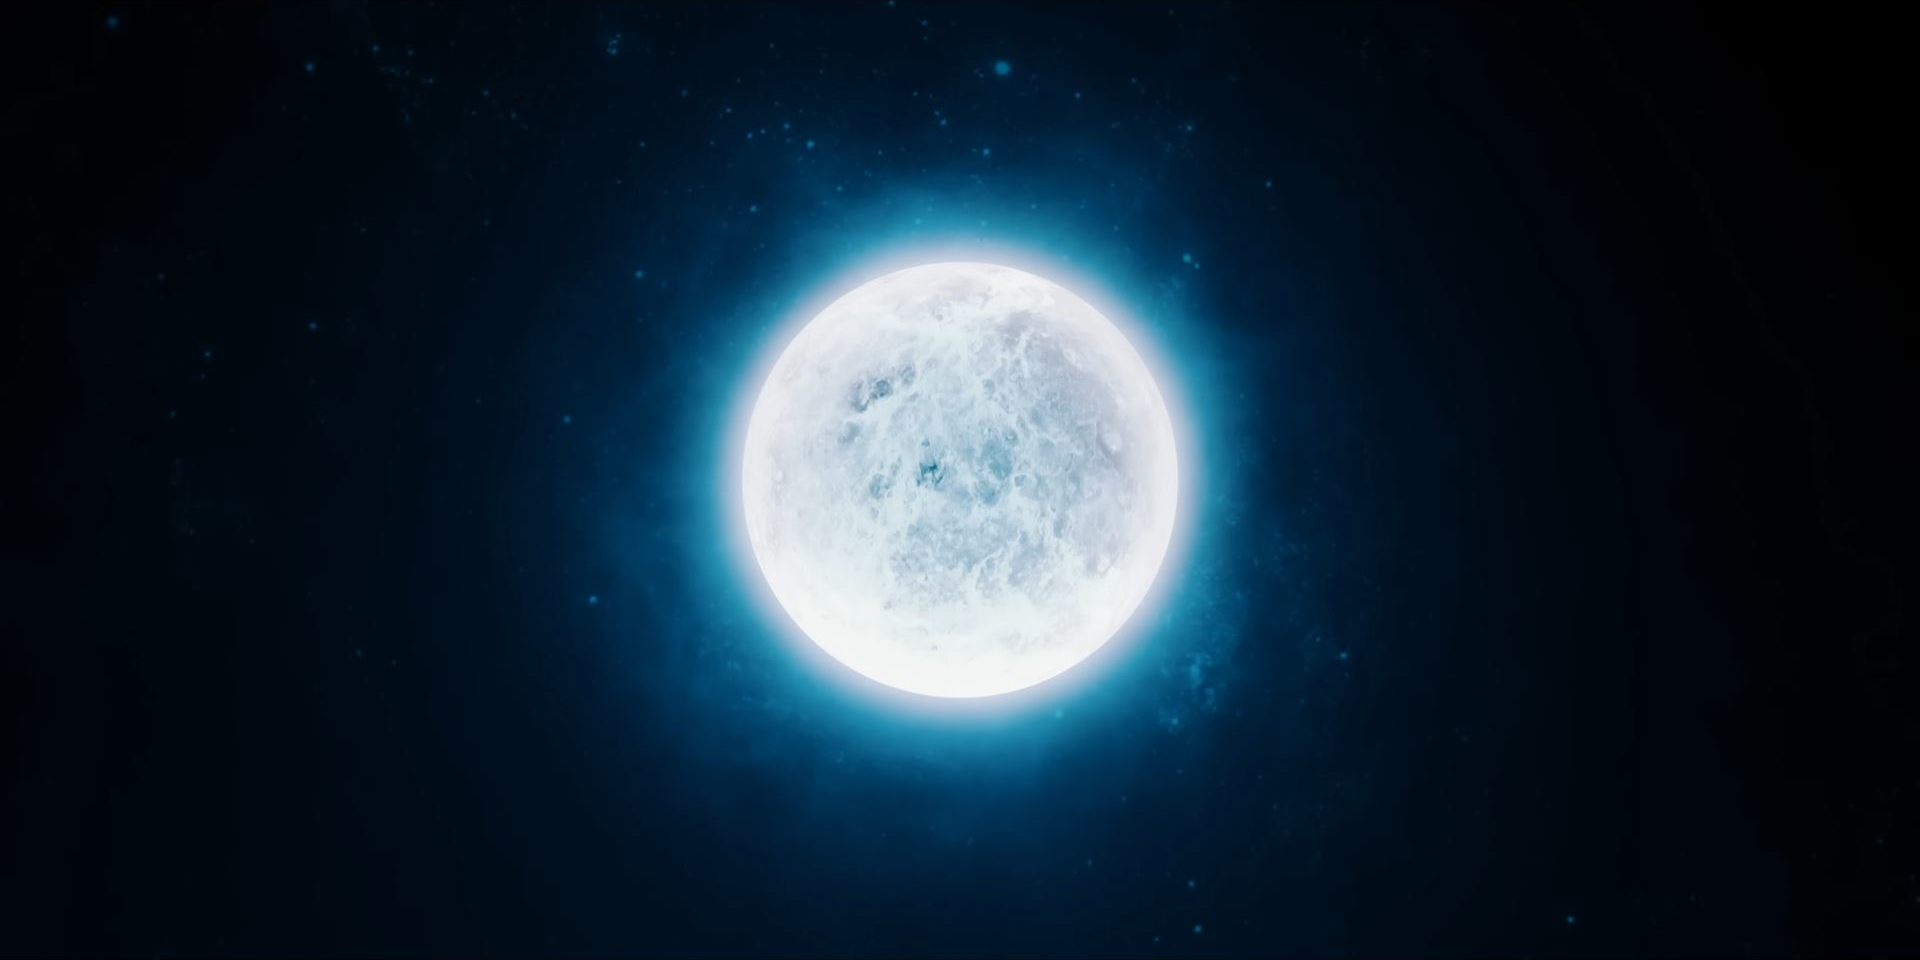 A white dwarf, the collapsed and cooling core of an earlier star